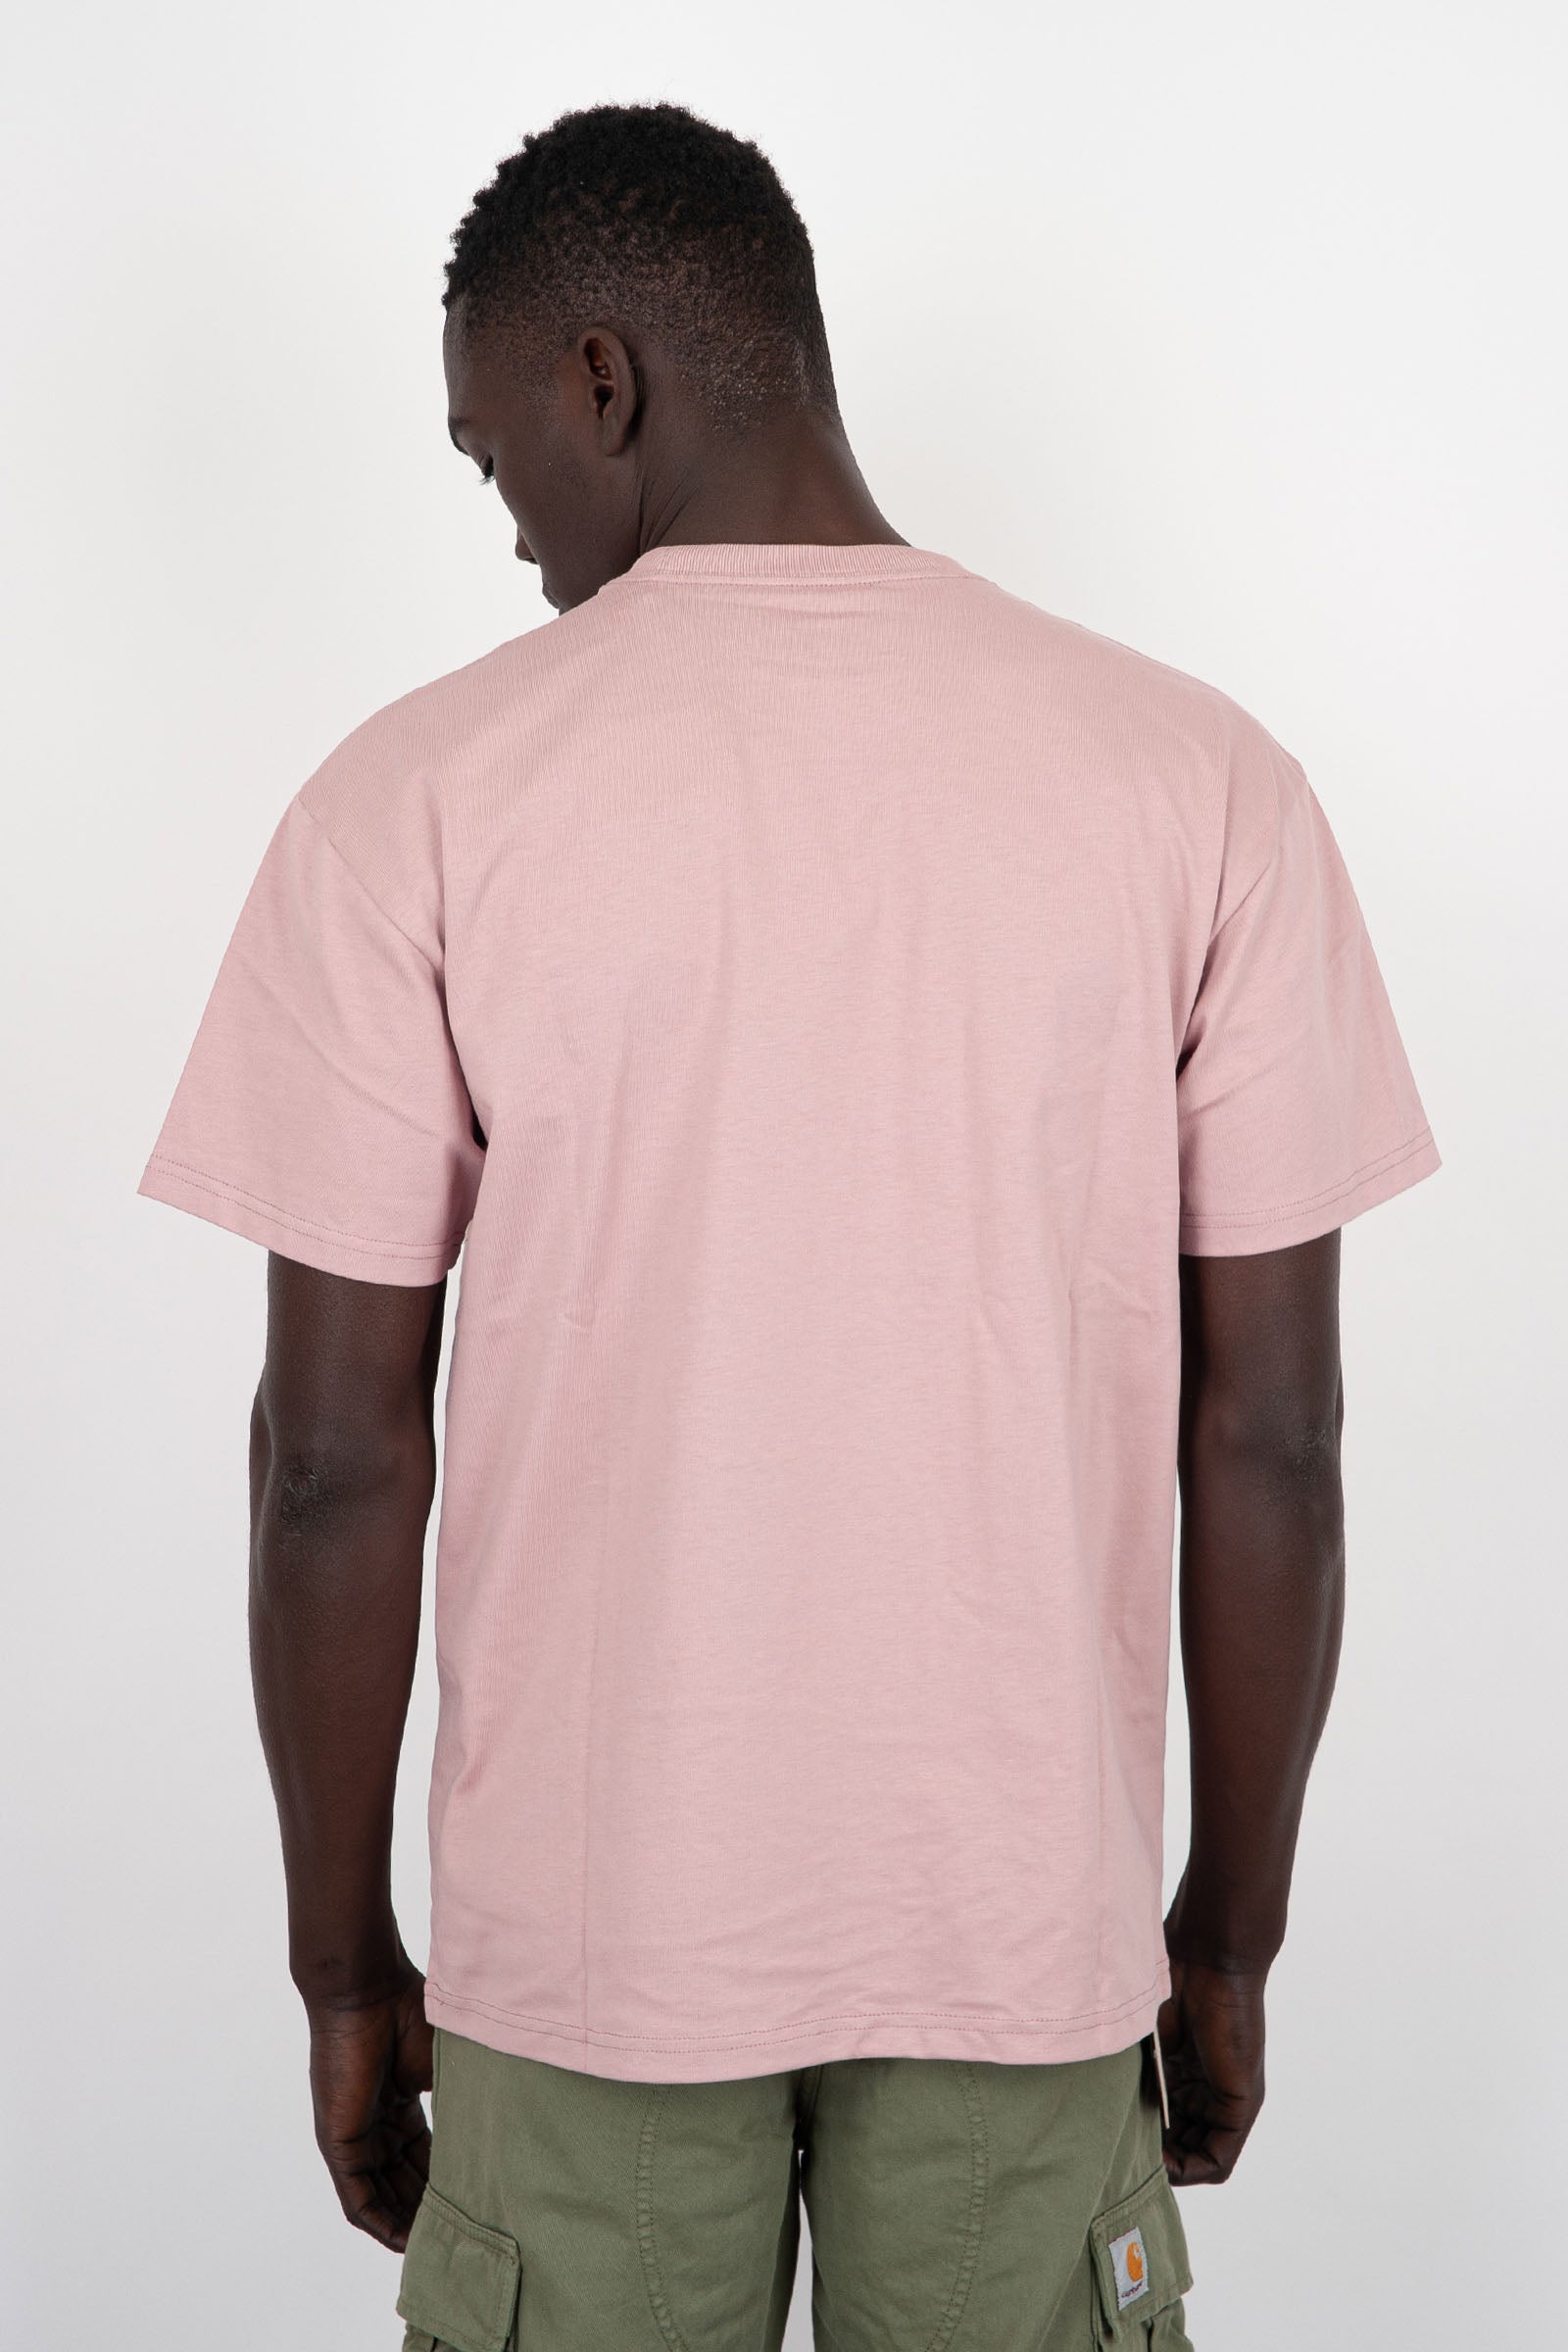 Carhartt WIP T-Shirt S/S Chase Cotton Pink - 4